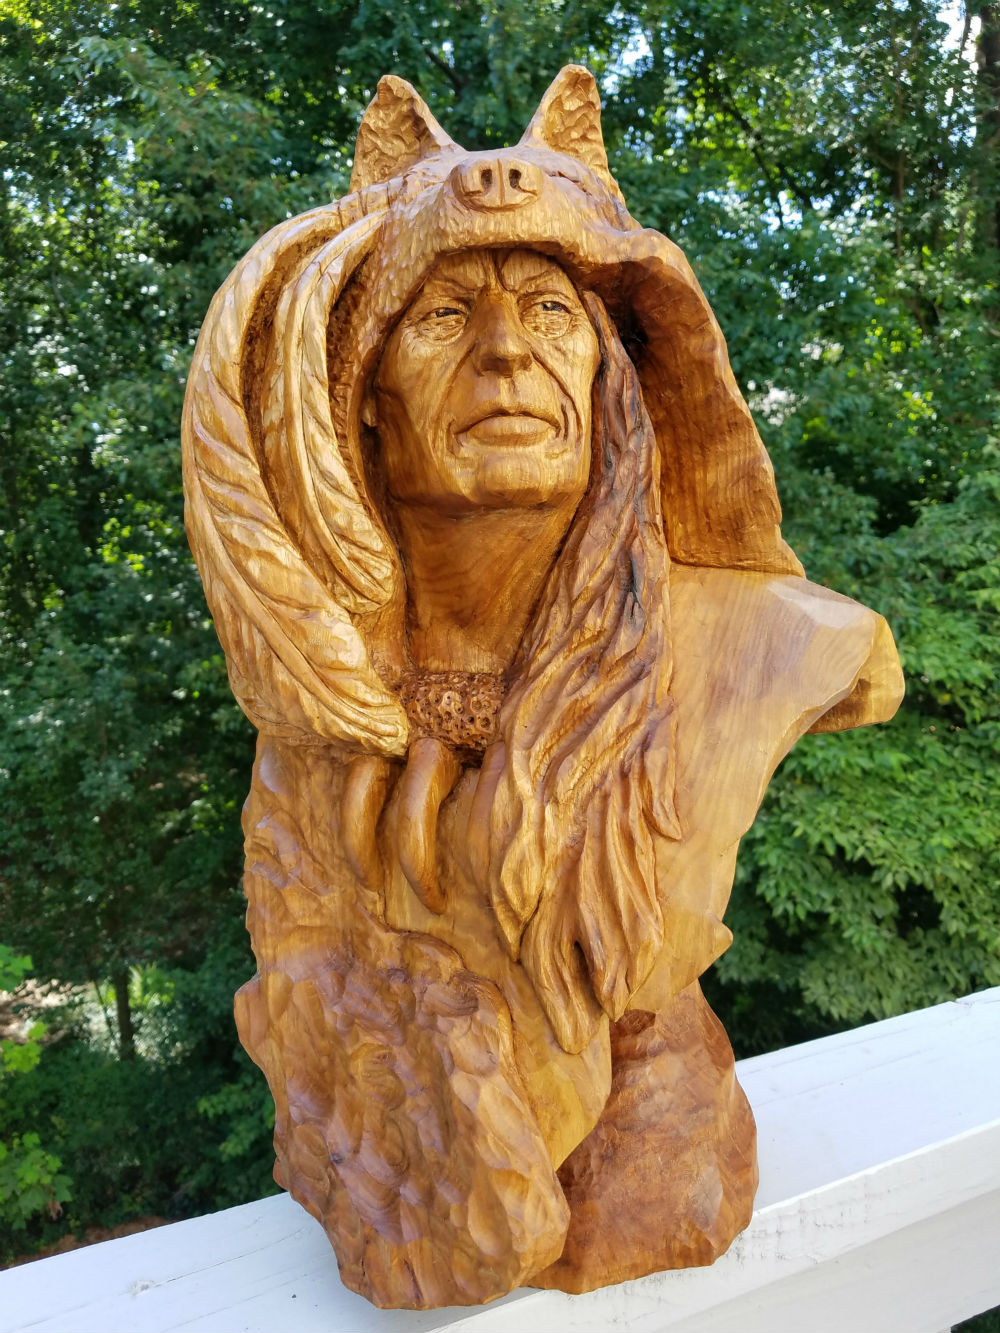 Bob Zenoble | Woodcarving Projects